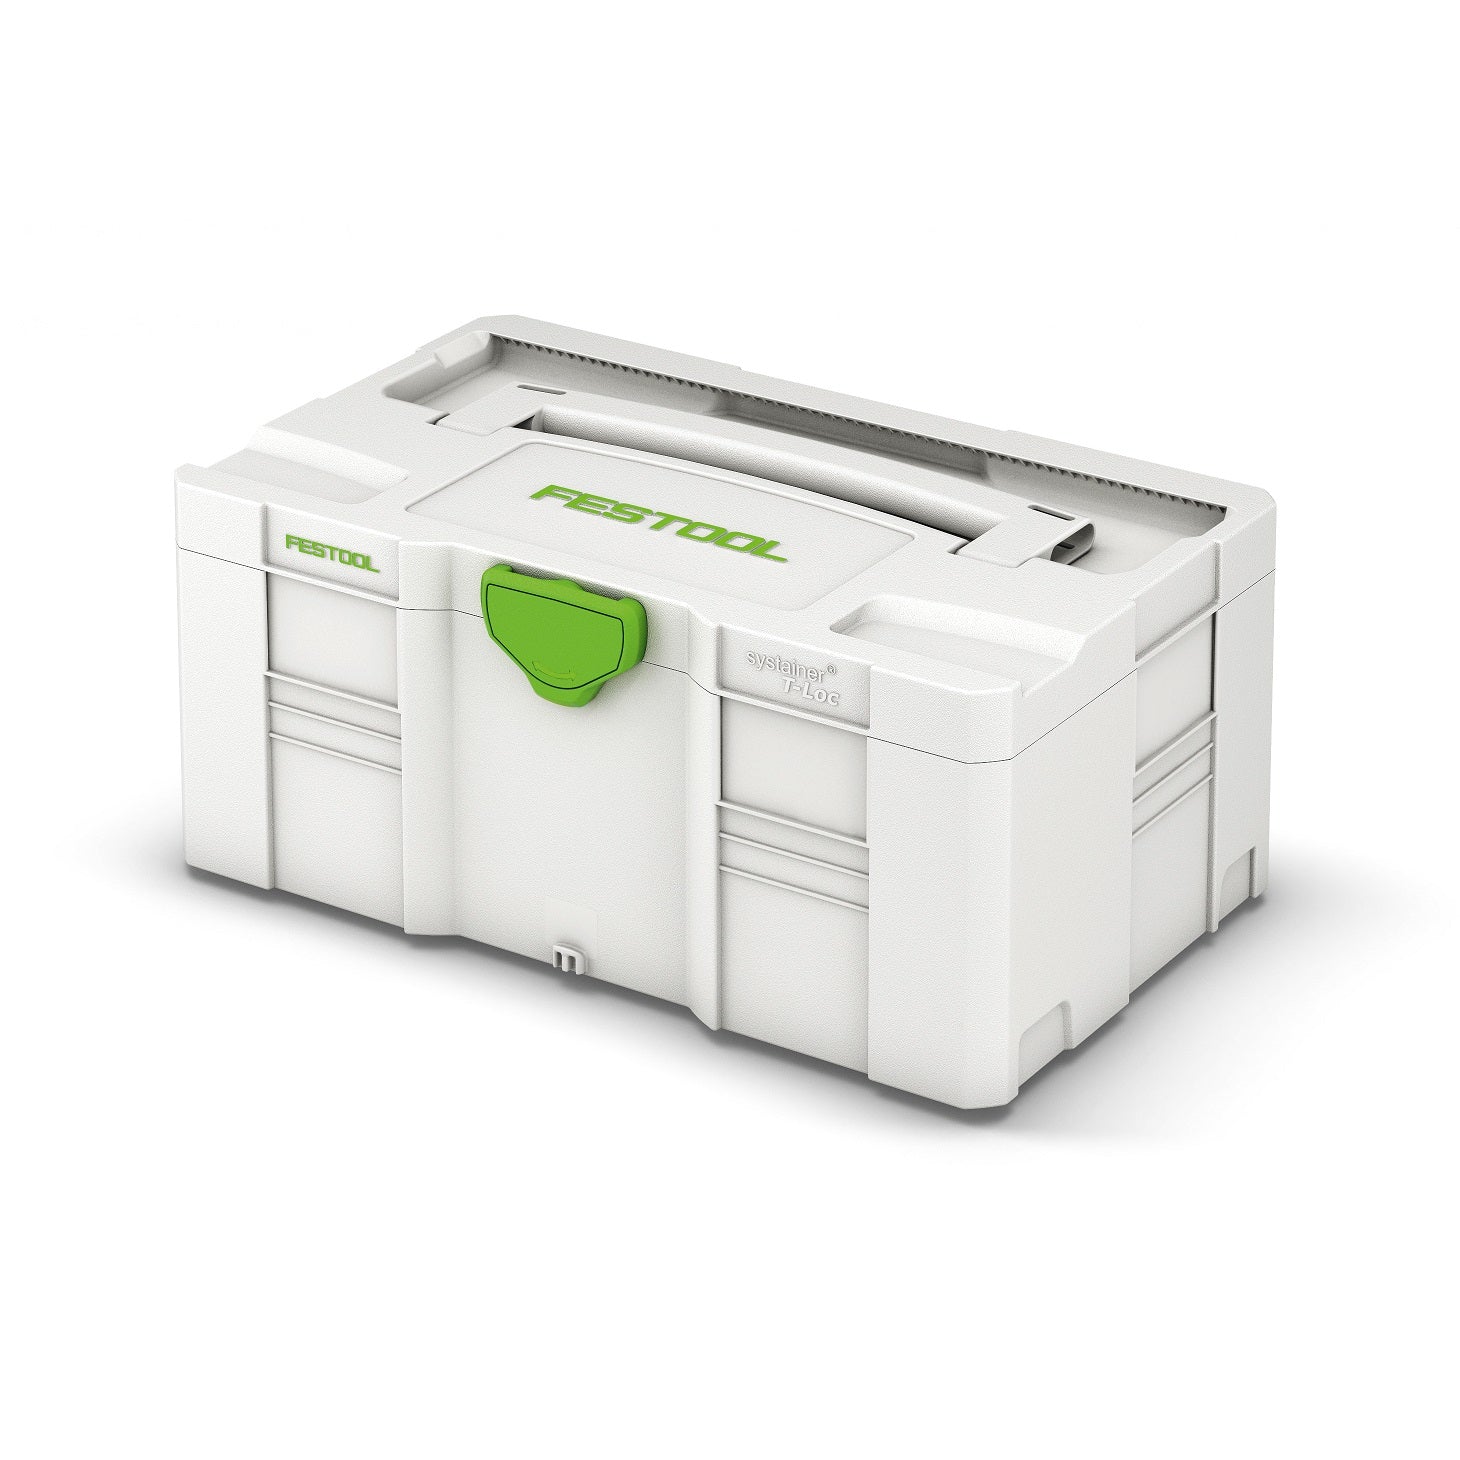 Festool  SYS-Storage Systainer (499901)